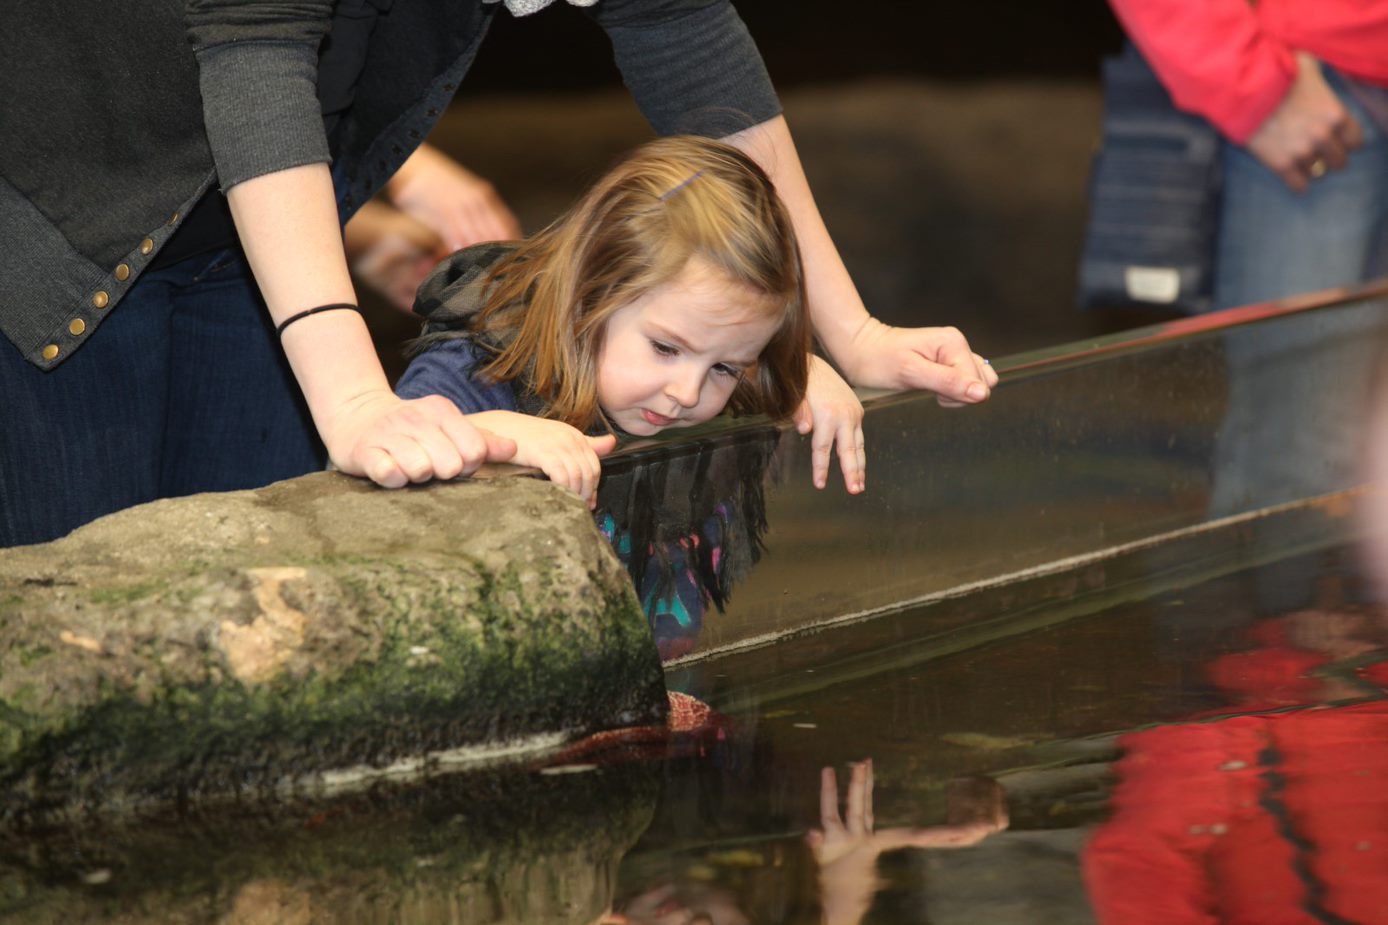 A child peers into a touch tank surrounded by adults.